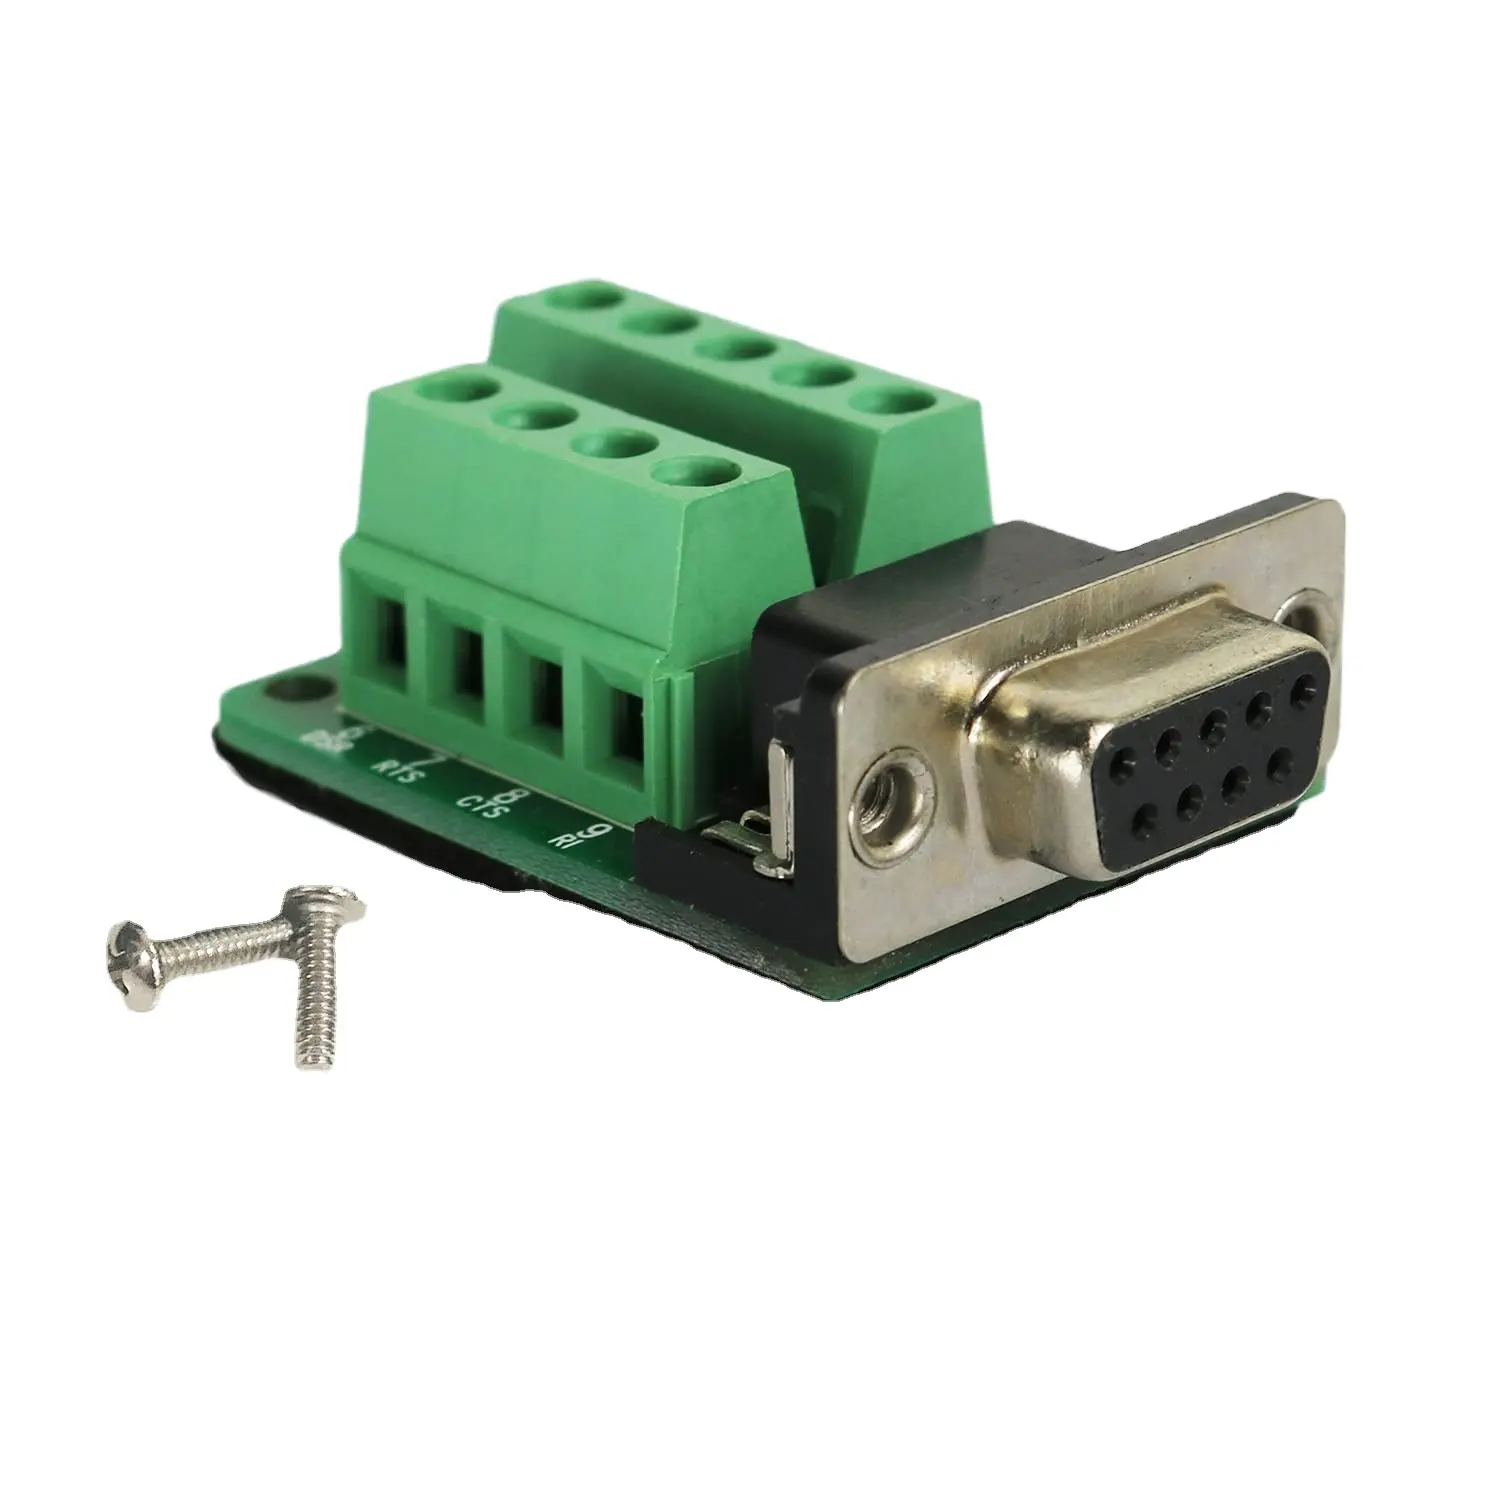 Aismartlink Db9 Breakout Connector Rs232 Seriële 9 Pin Connector Db9 Terminal Vrouw Met Schroef